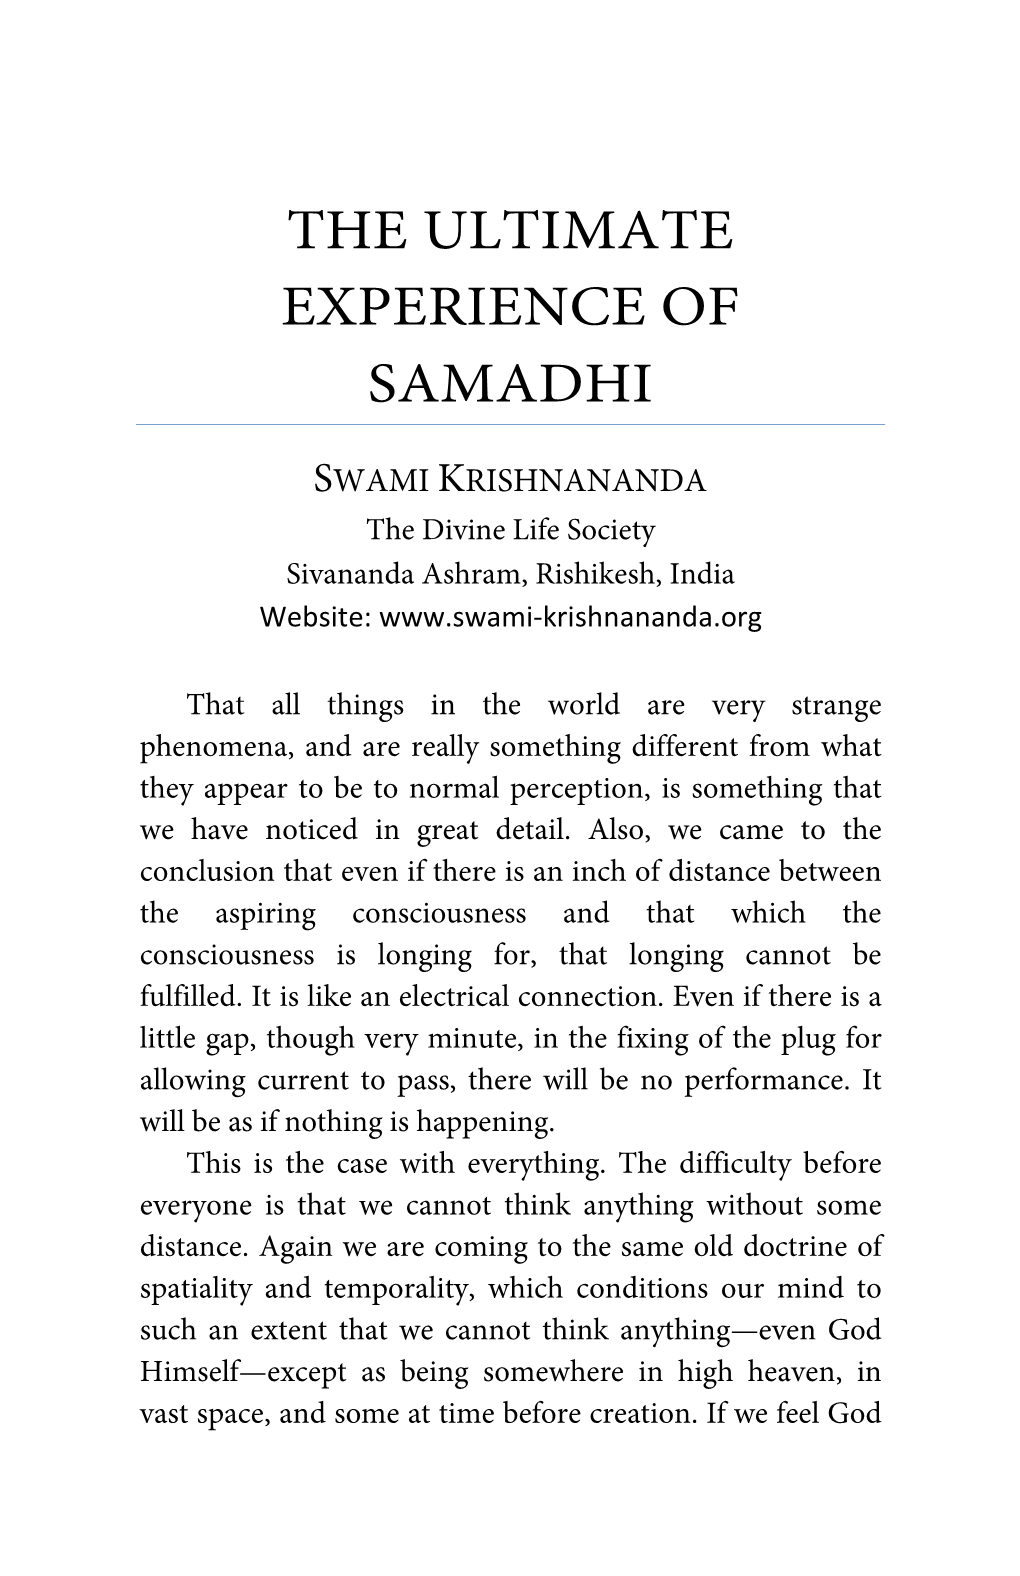 The Ultimate Experience of Samadhi